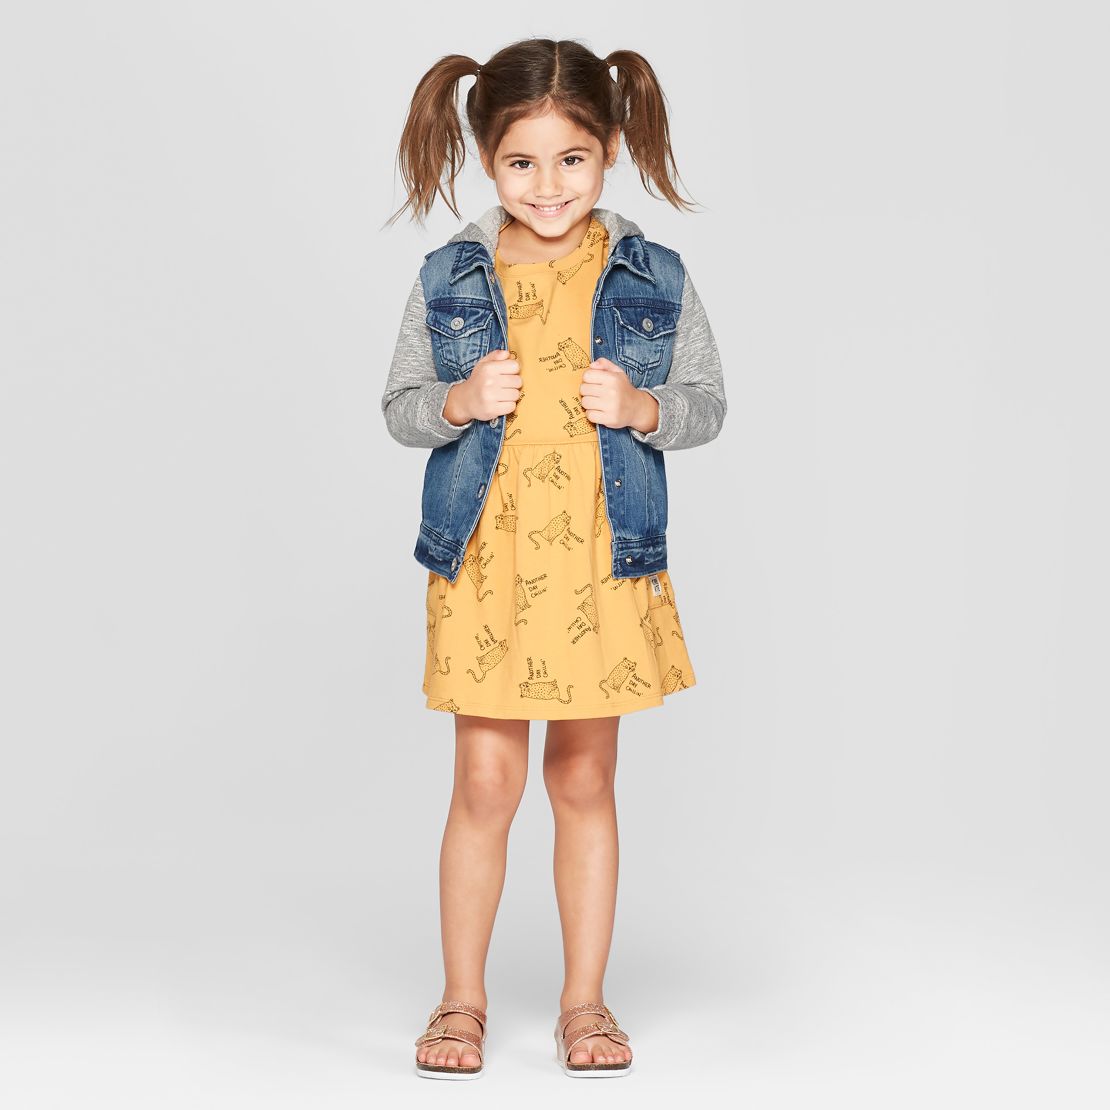 Target will extend its trendy kids' clothing line Art Class to toddlers in an effort to win parents.